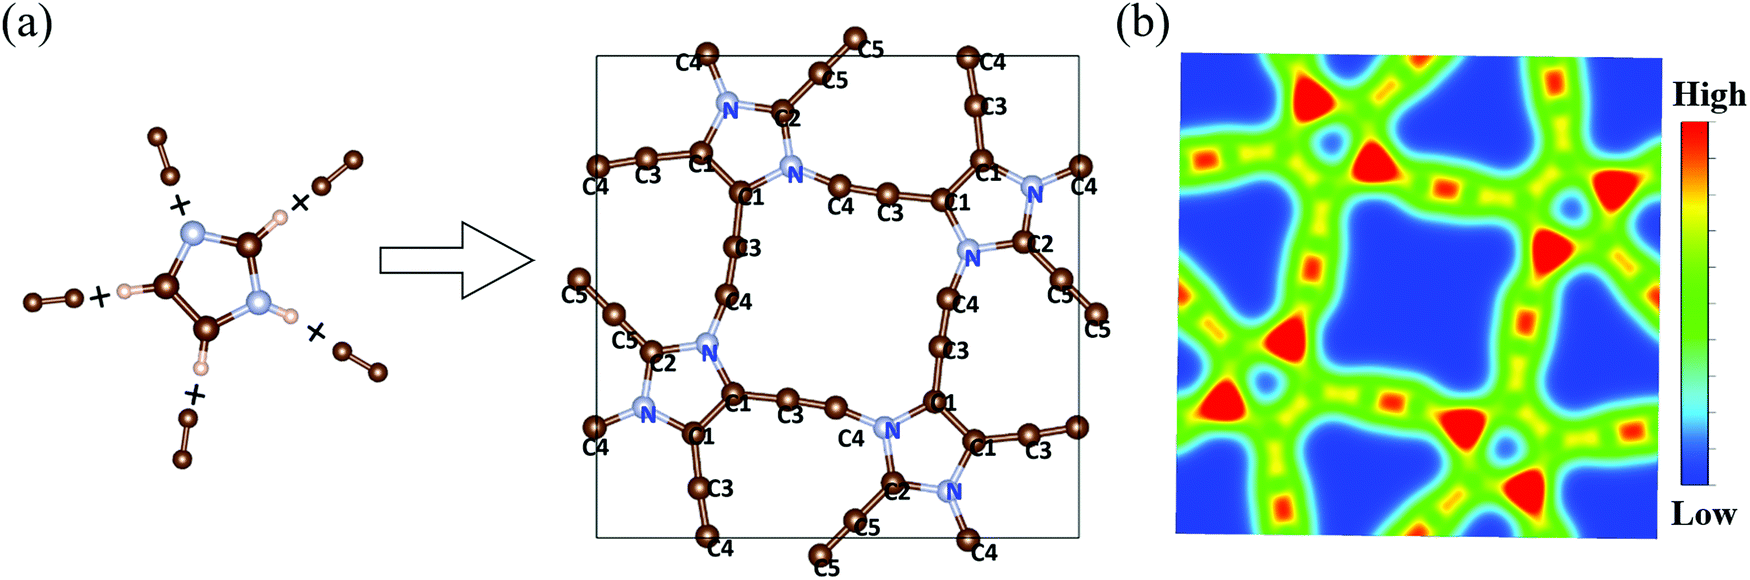 Imidazole Graphyne A New 2d Carbon Nitride With A Direct Bandgap And Strong Ir Refraction Physical Chemistry Chemical Physics Rsc Publishing Doi 10 1039 D1cpe